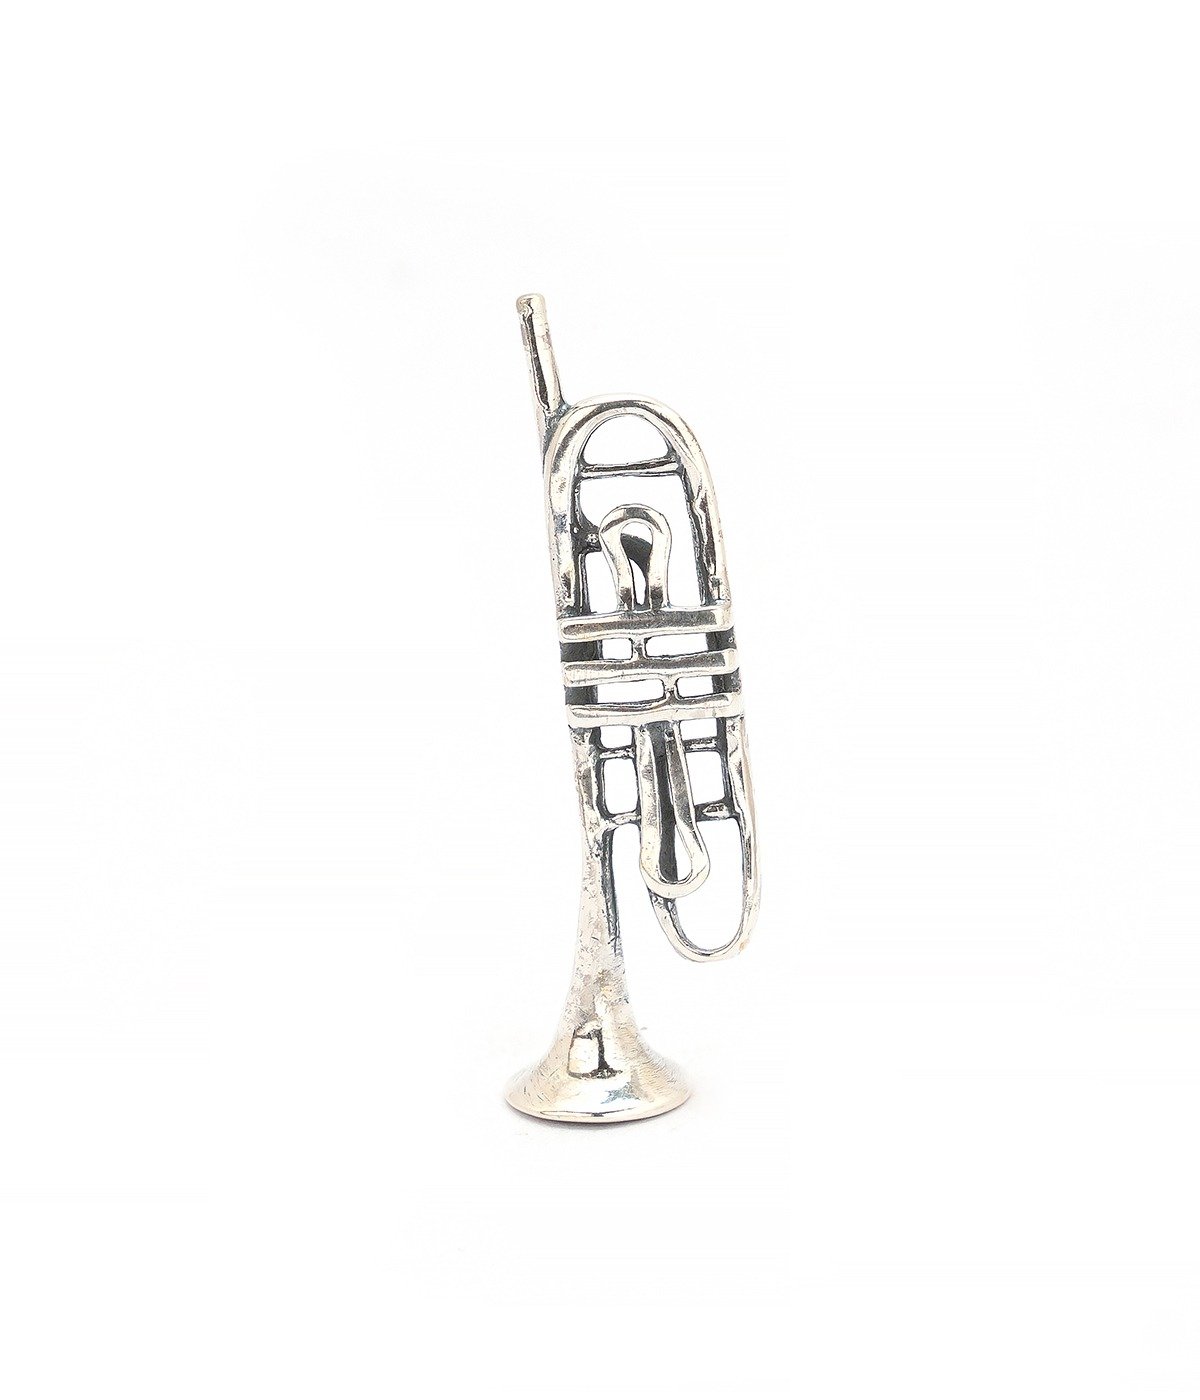 92.5 STERLING SILVER  MINIATURE TRUMPET FOR GIFT